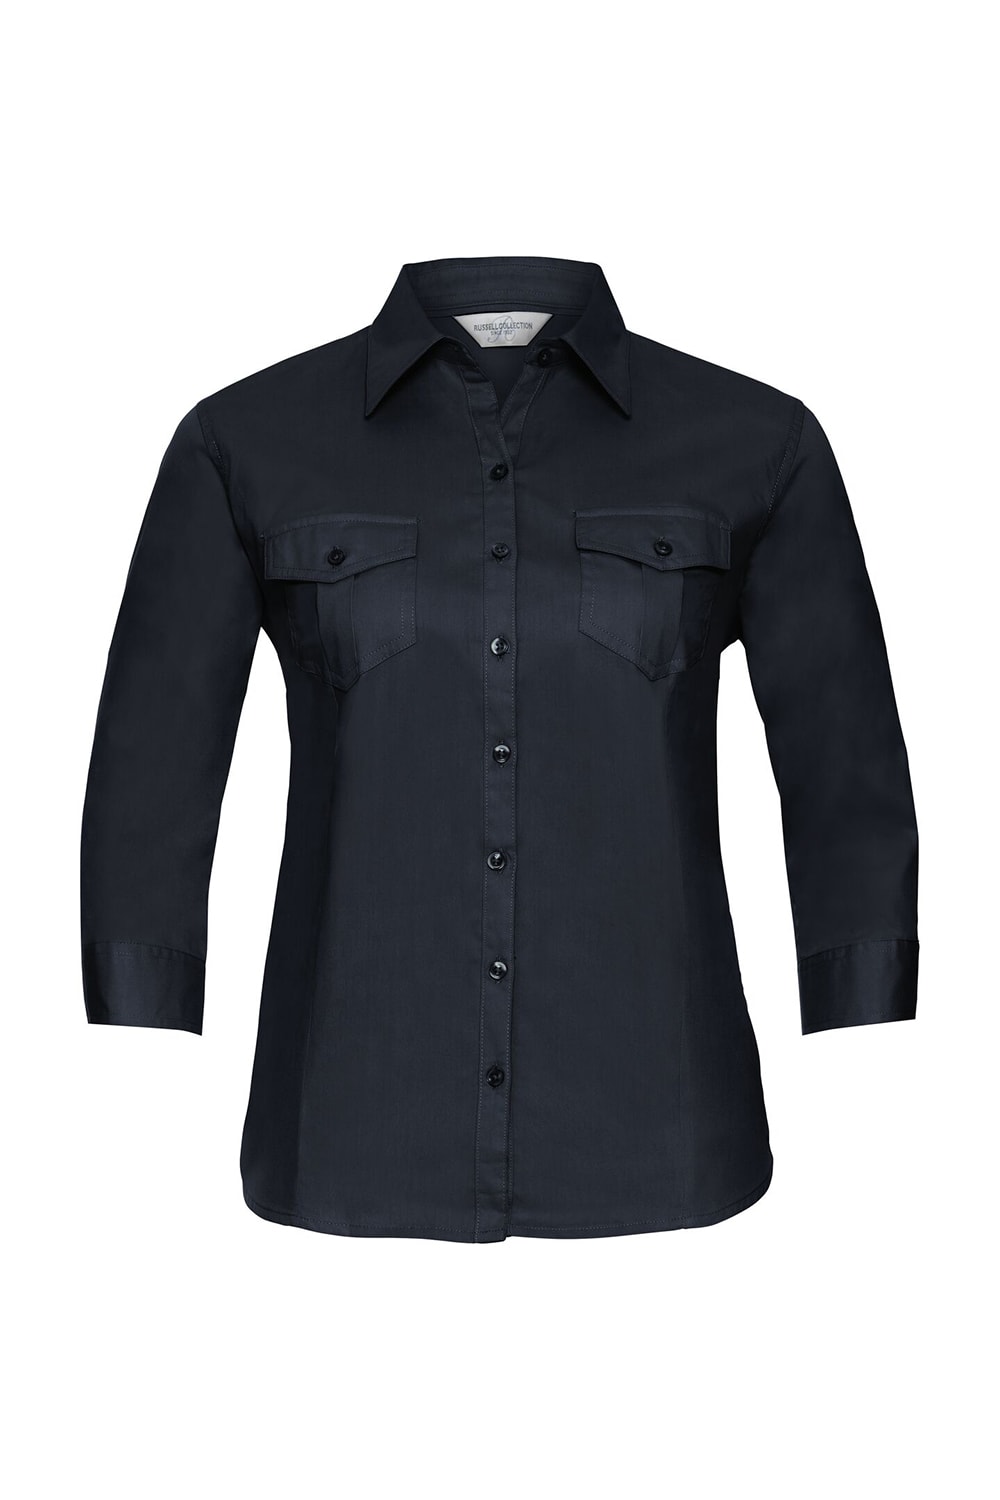 Russell Collection Womens/Ladies Roll-Sleeve 3/4 Sleeve Work Shirt (French Navy)